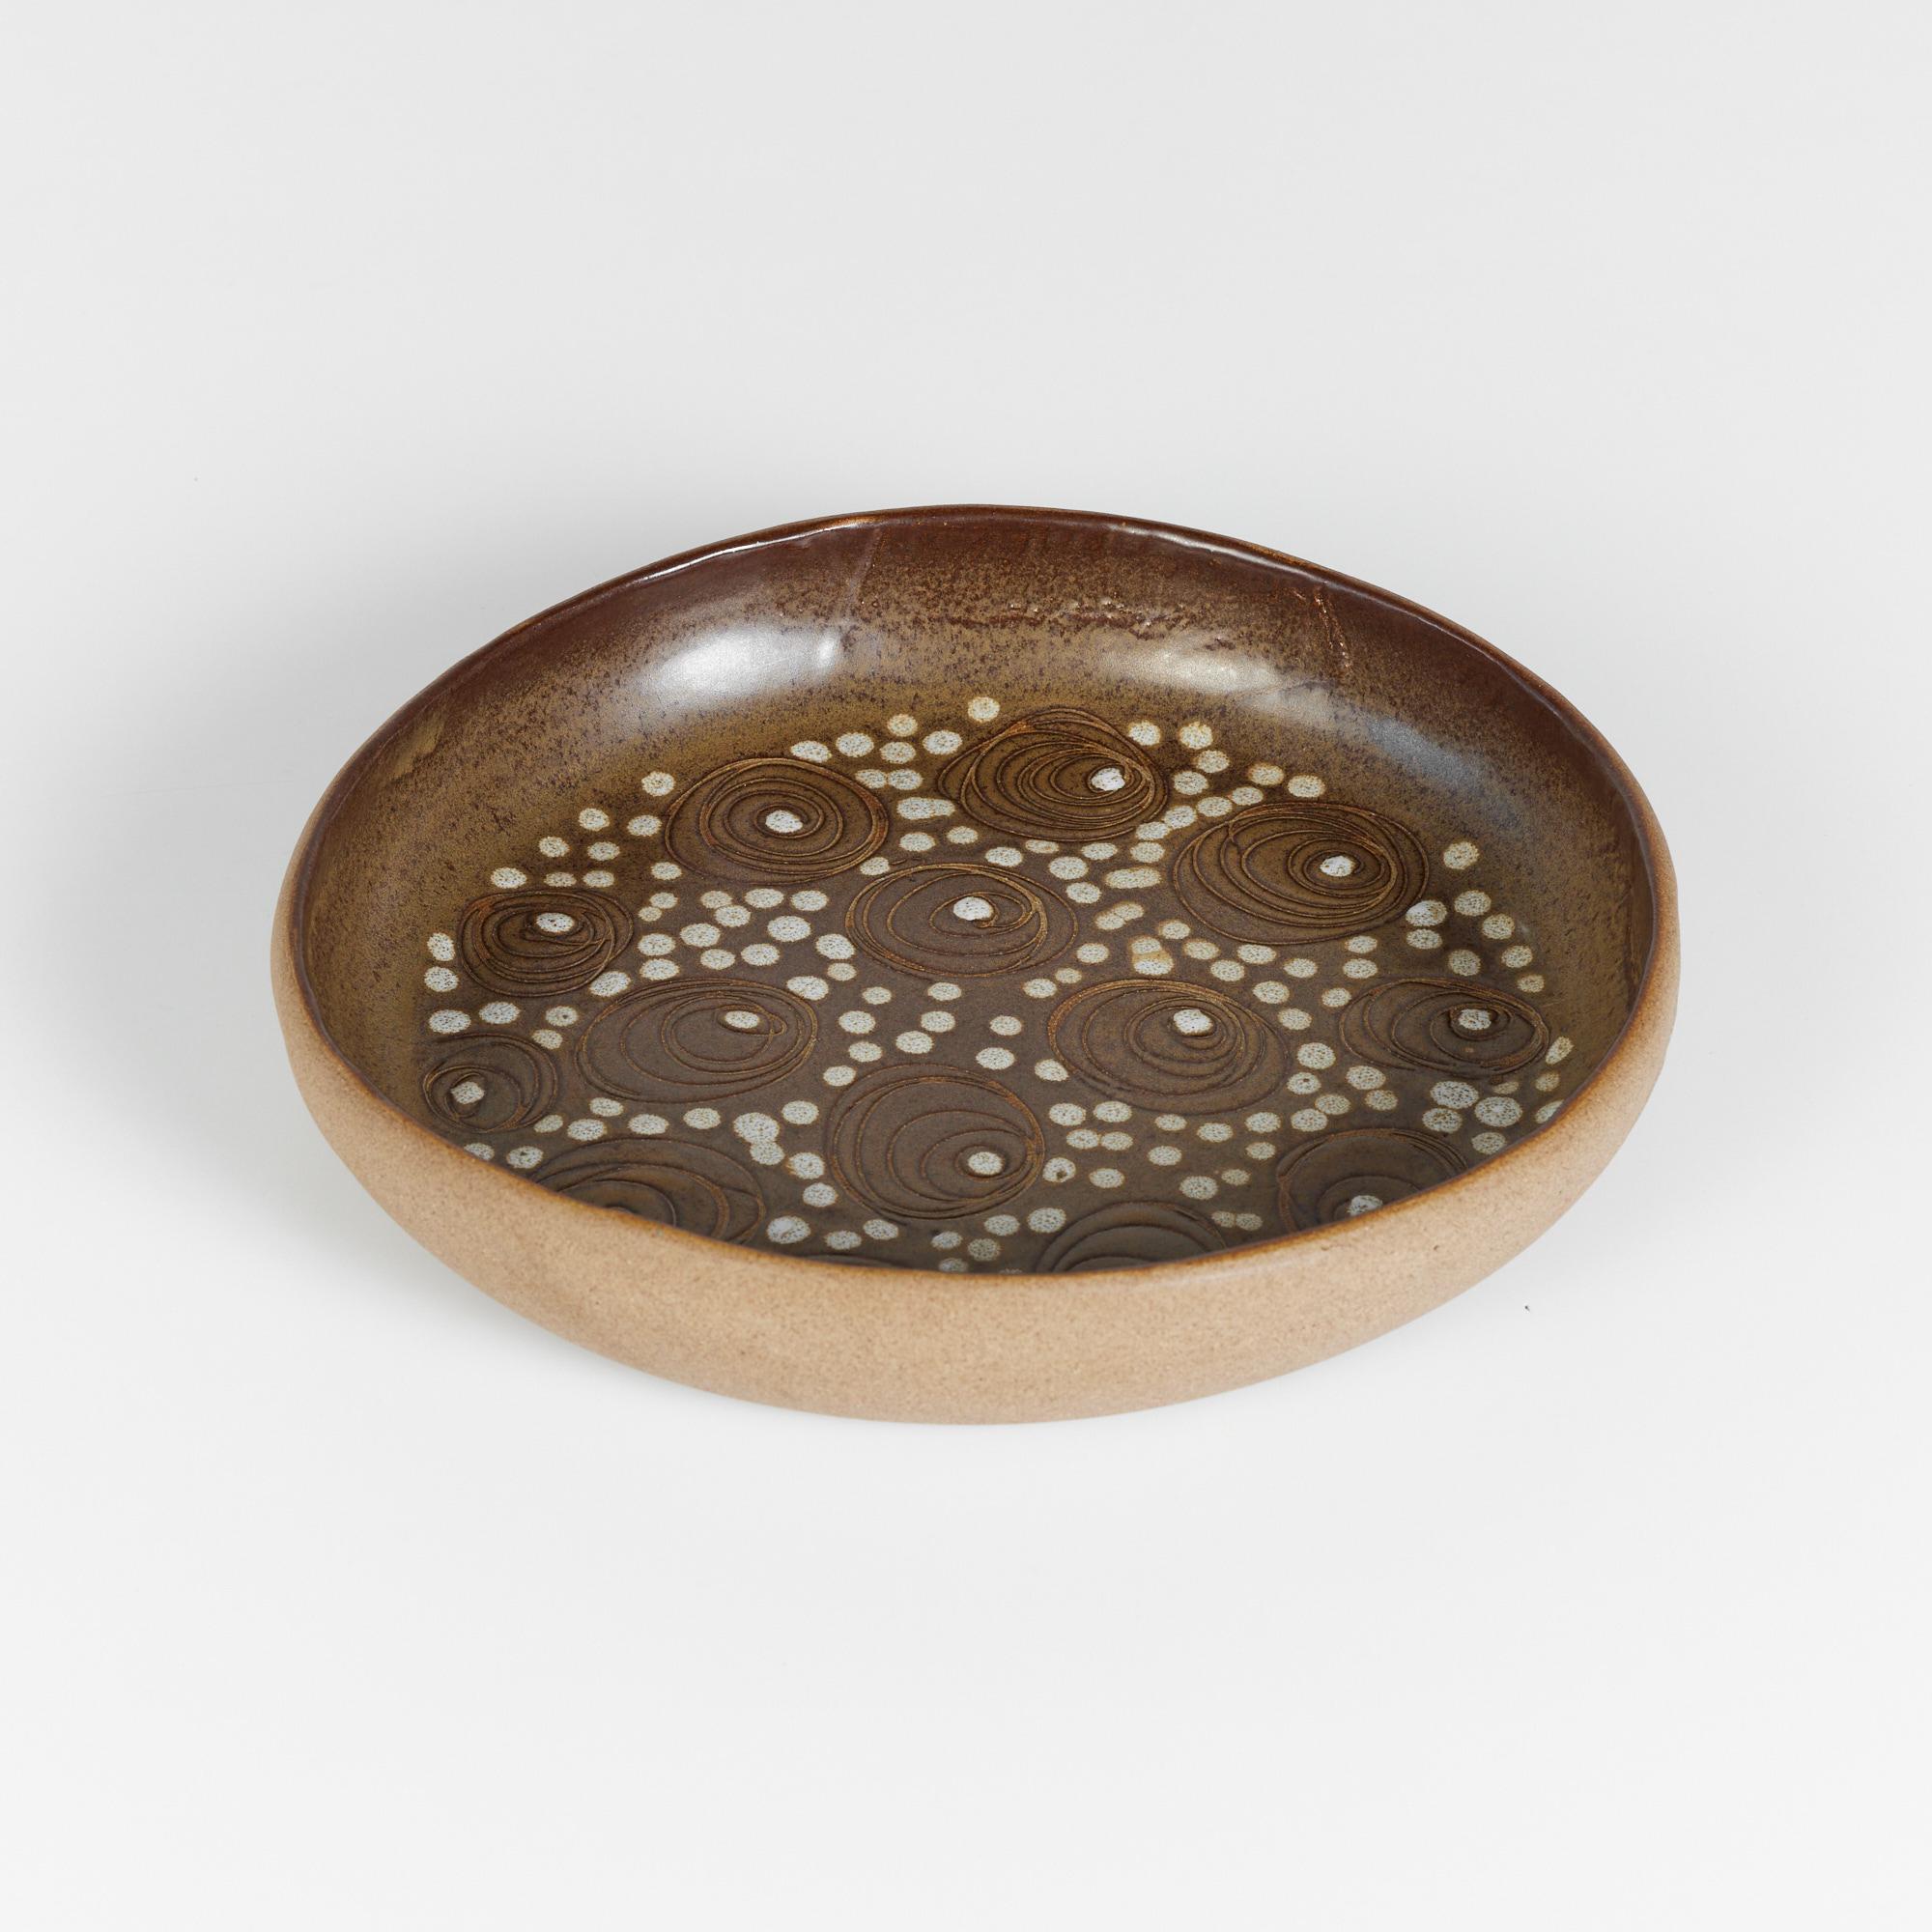 Ceramic bowl by husband-and-wife design team Gordon and Jane Martz. Produced by their family company, Marshall Studios in Indiana beginning in 1957. The stoneware ceramic bowl is glazed on the interior and comprised of earth tone shades. The